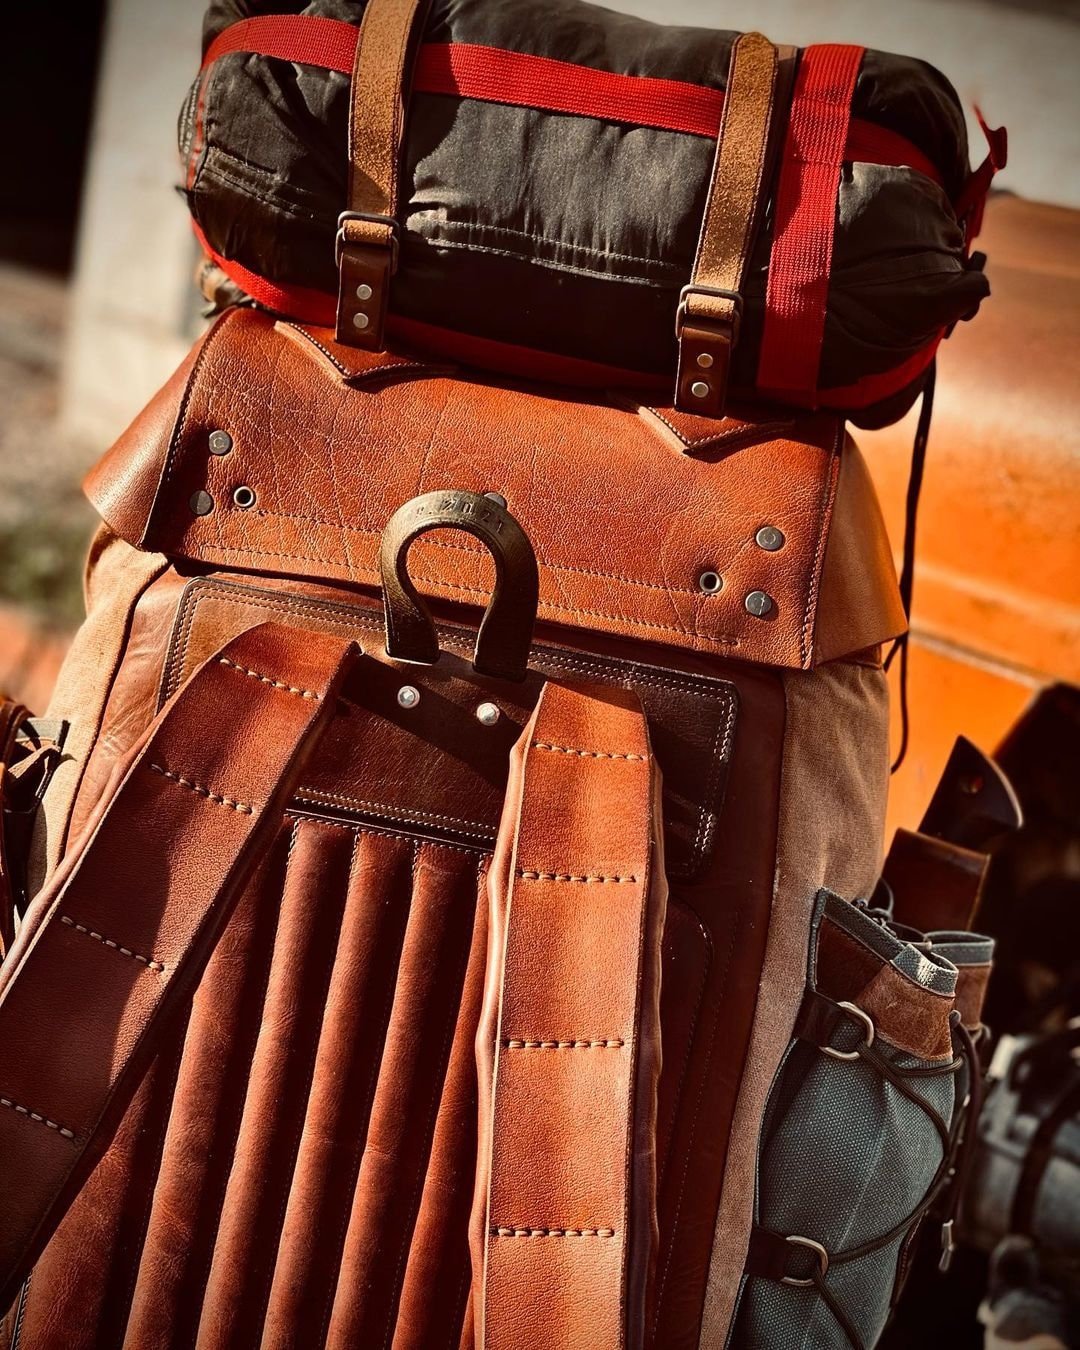 Only 1 Pieces Left Discount 799 to 599, Handmade Leather and Waxed Backpack for Travel, Camping | inside 45 Liter | Personalization  99percenthandmade   